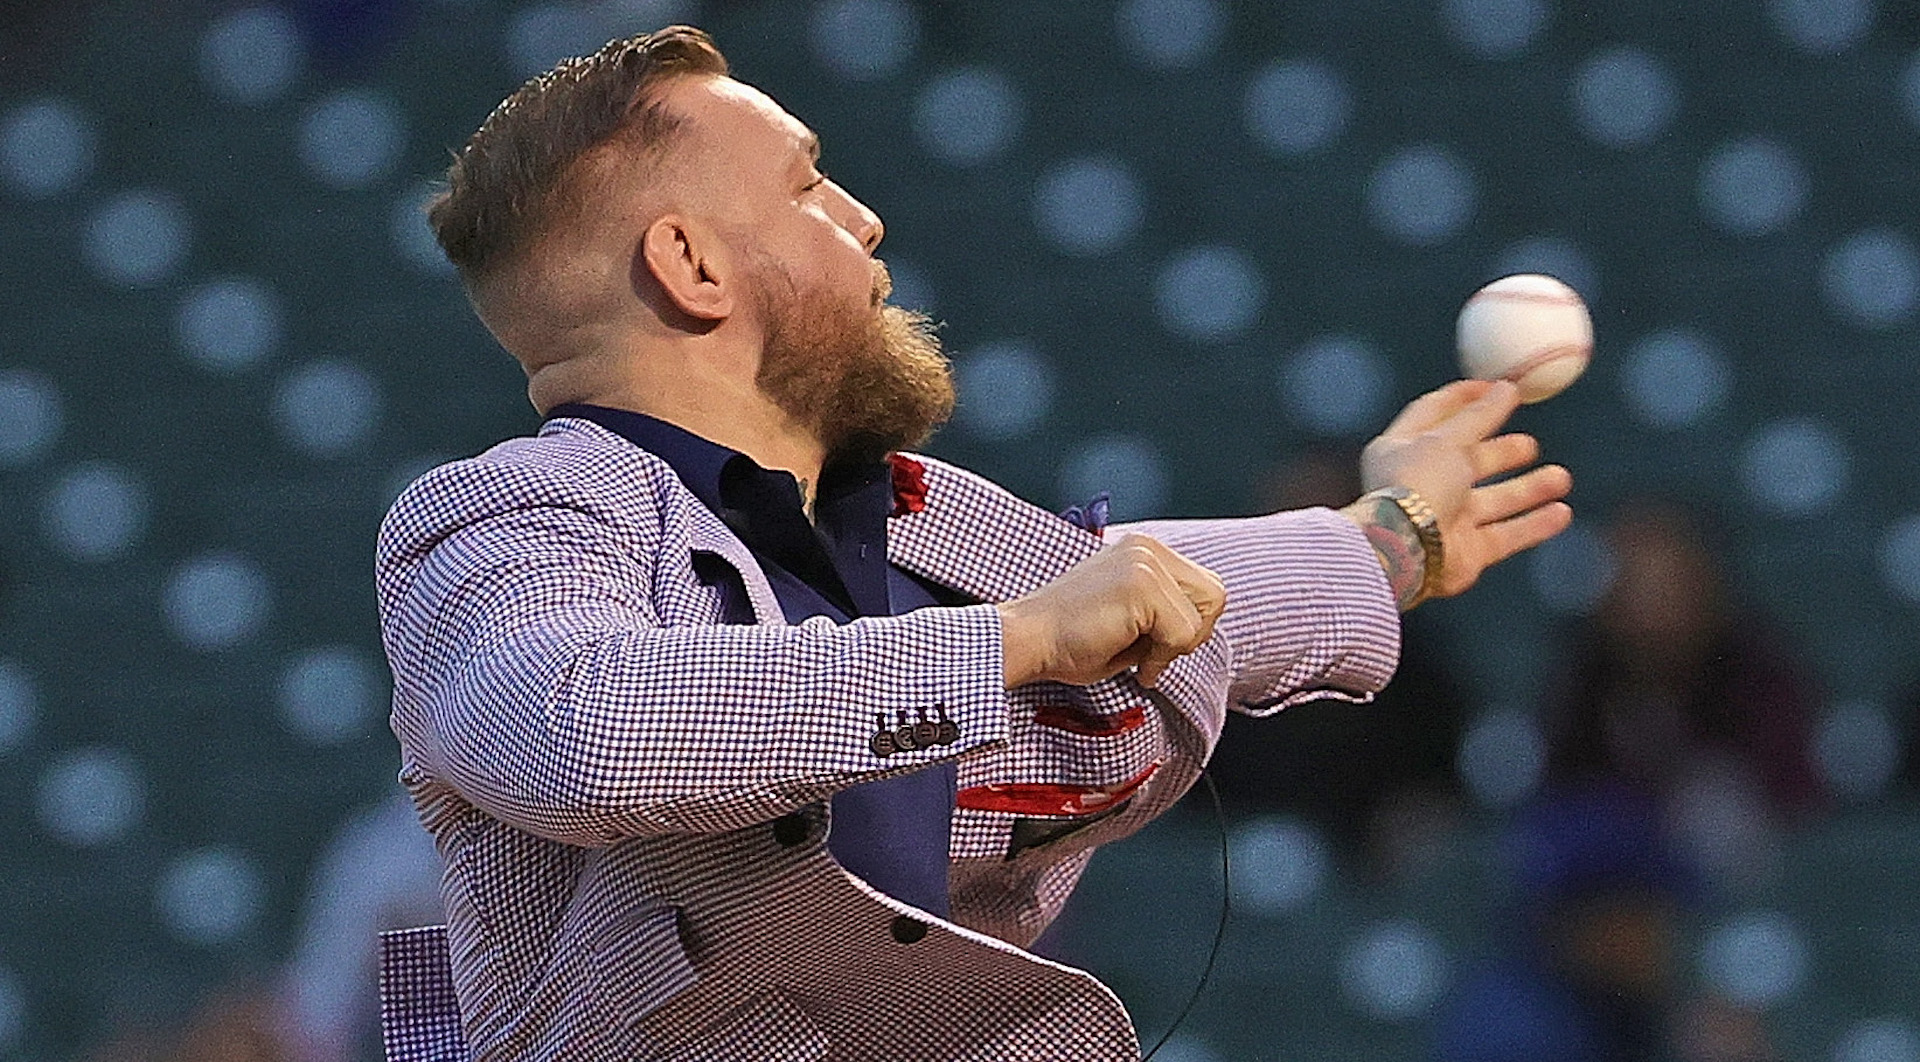 People Are Comparing Conor McGregor to 50 Cent After He Threw Terrible First Pitch at Cubs Game